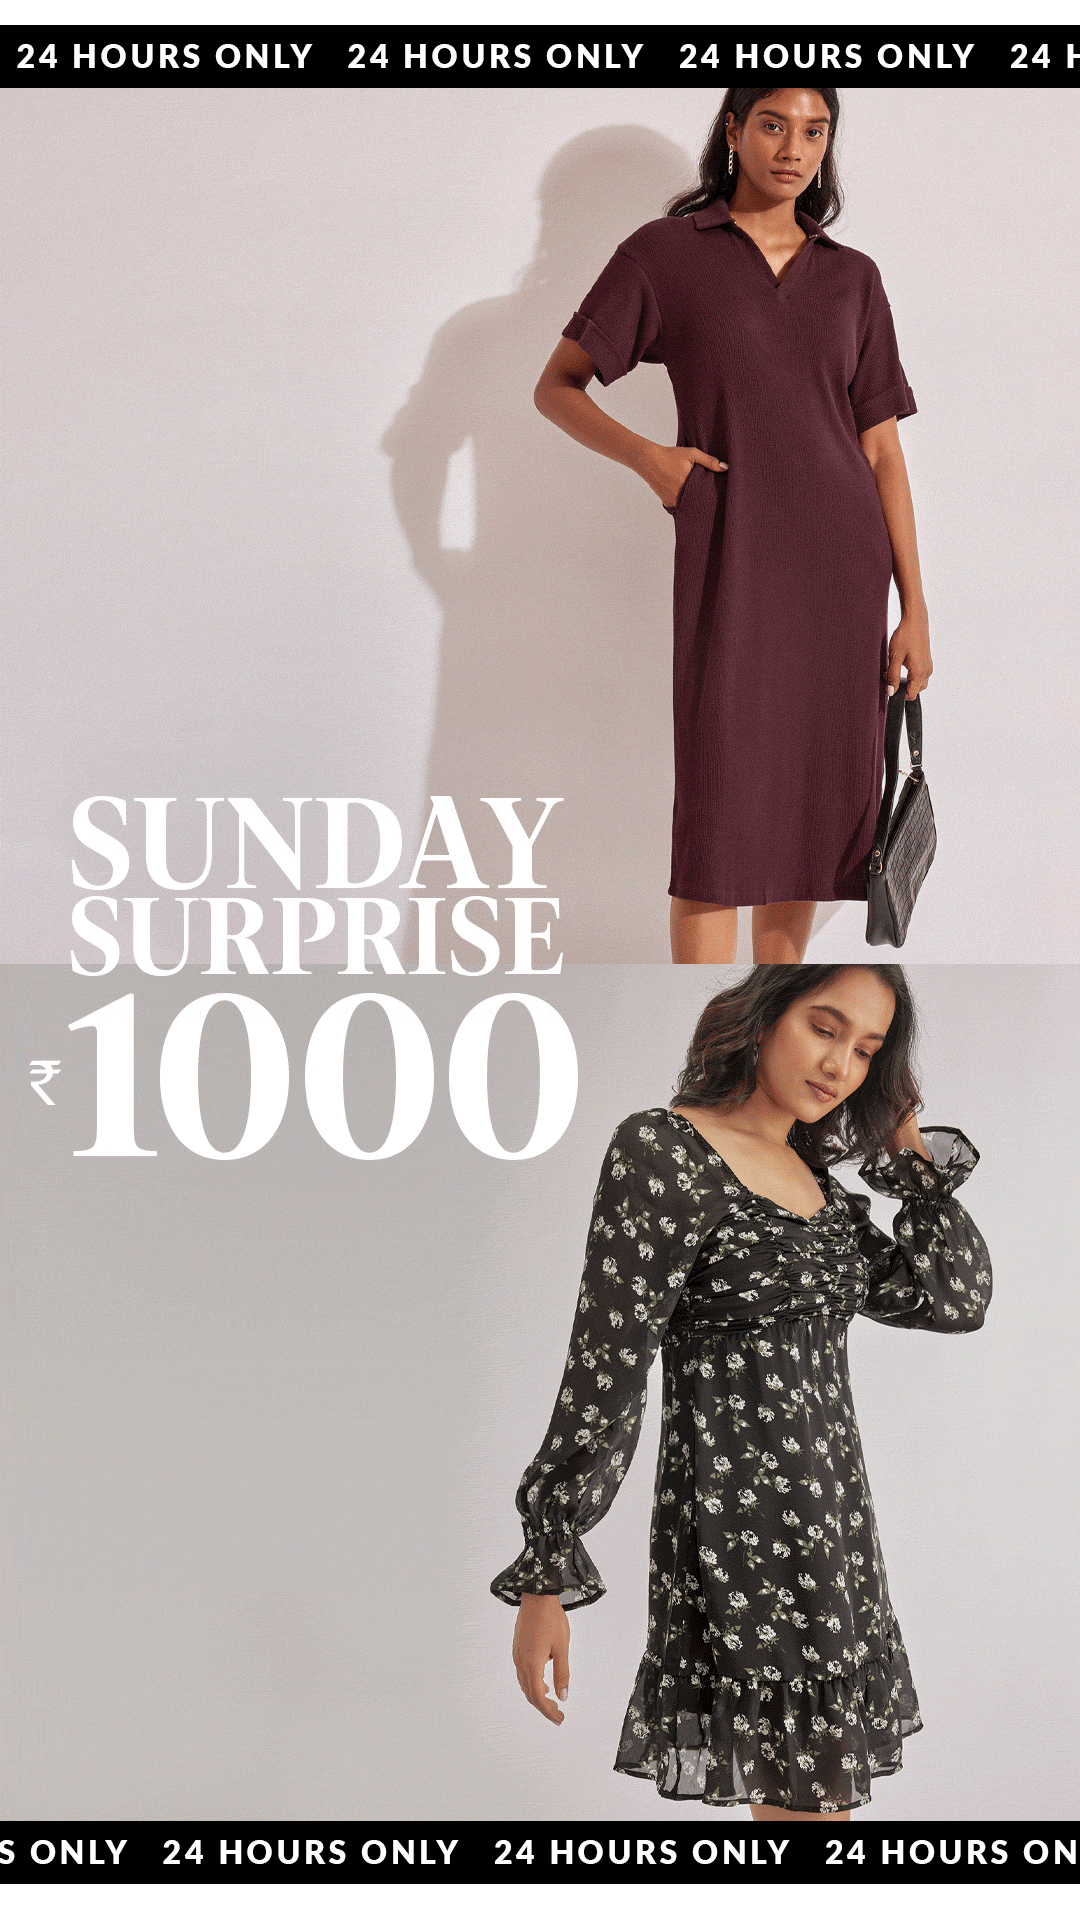 Rs.1000 each: A deep hued knit dress + TWO long drive-spt styles